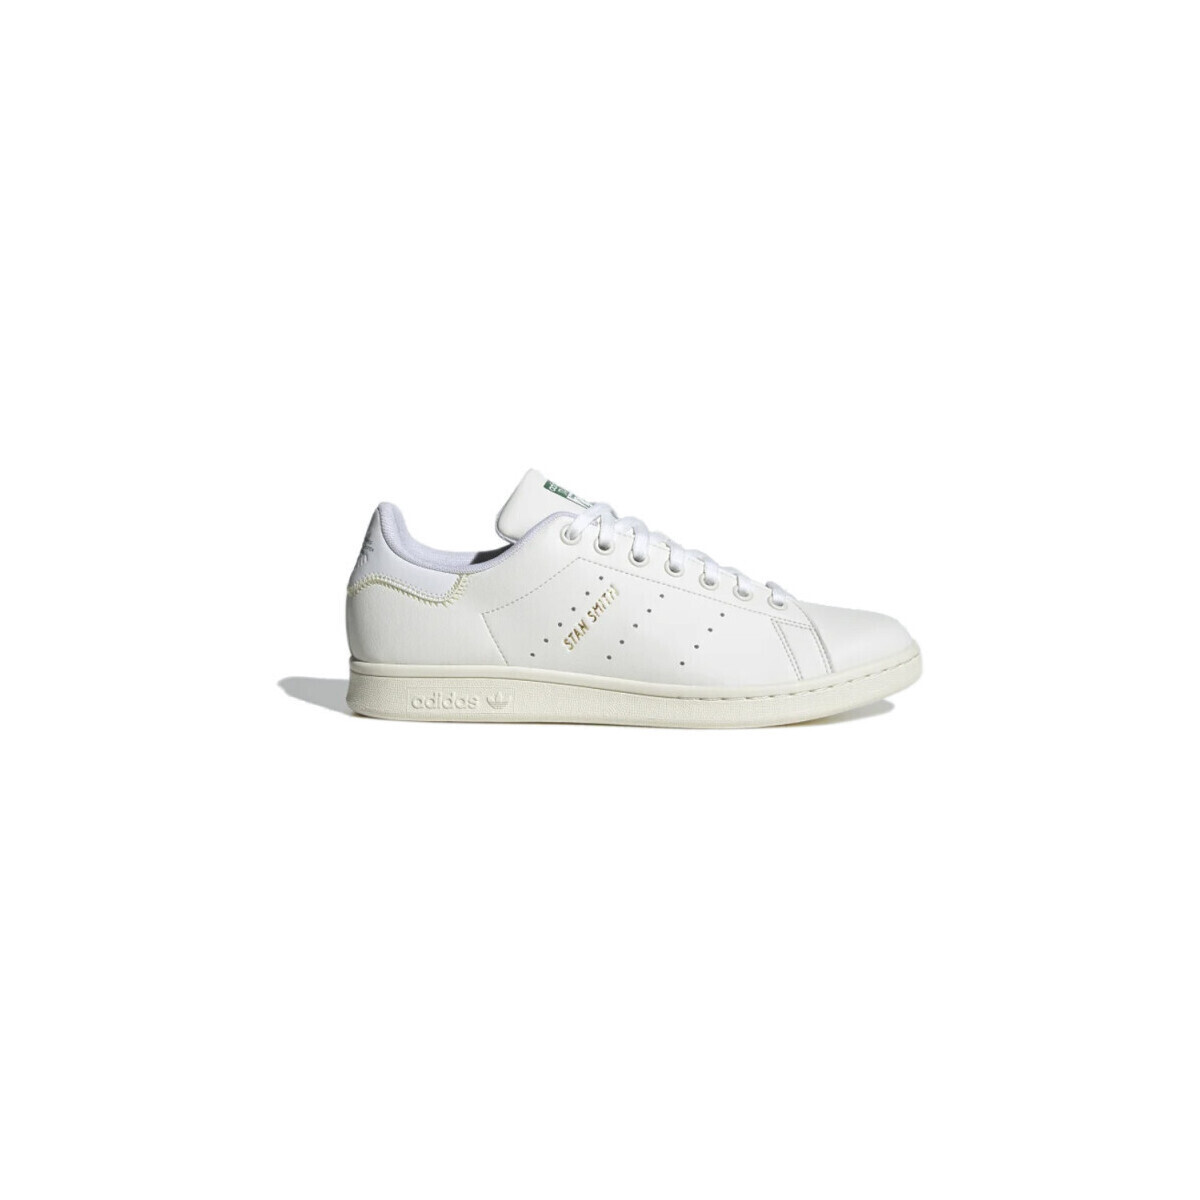 Chaussures adidas Ultra Boost 20 "Core Black" BASKETS  UNISEXE STAN SMITH BLANCHES Blanc